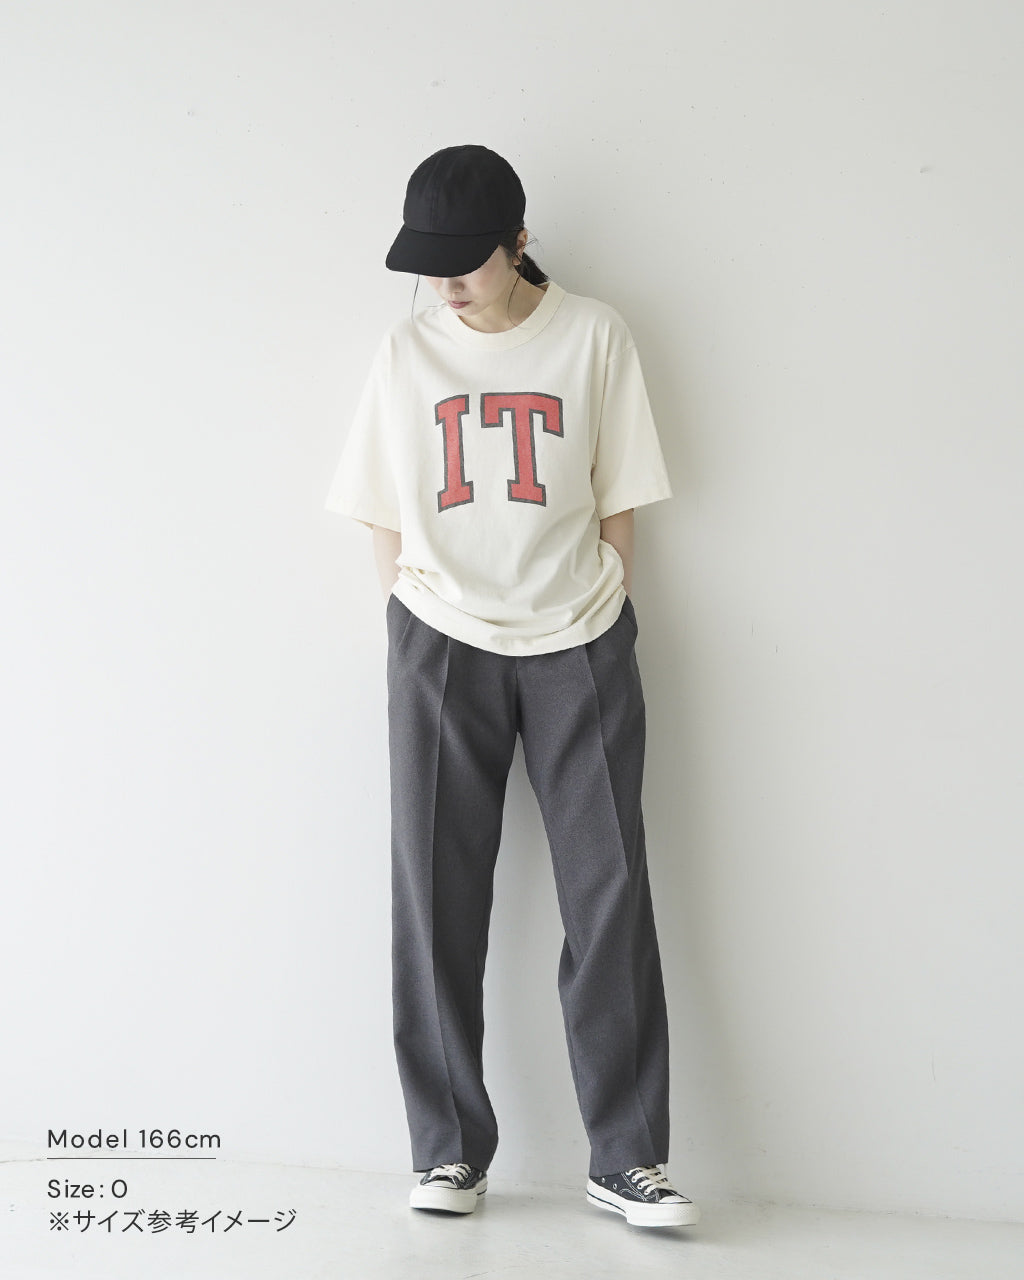 blurhms ROOTSTOCK ブラームス ルーツストック 88/12 プリント Tシャツ Cotton Rayon 88/12 Print Tee 12-88 bROOTS23S32【送料無料】